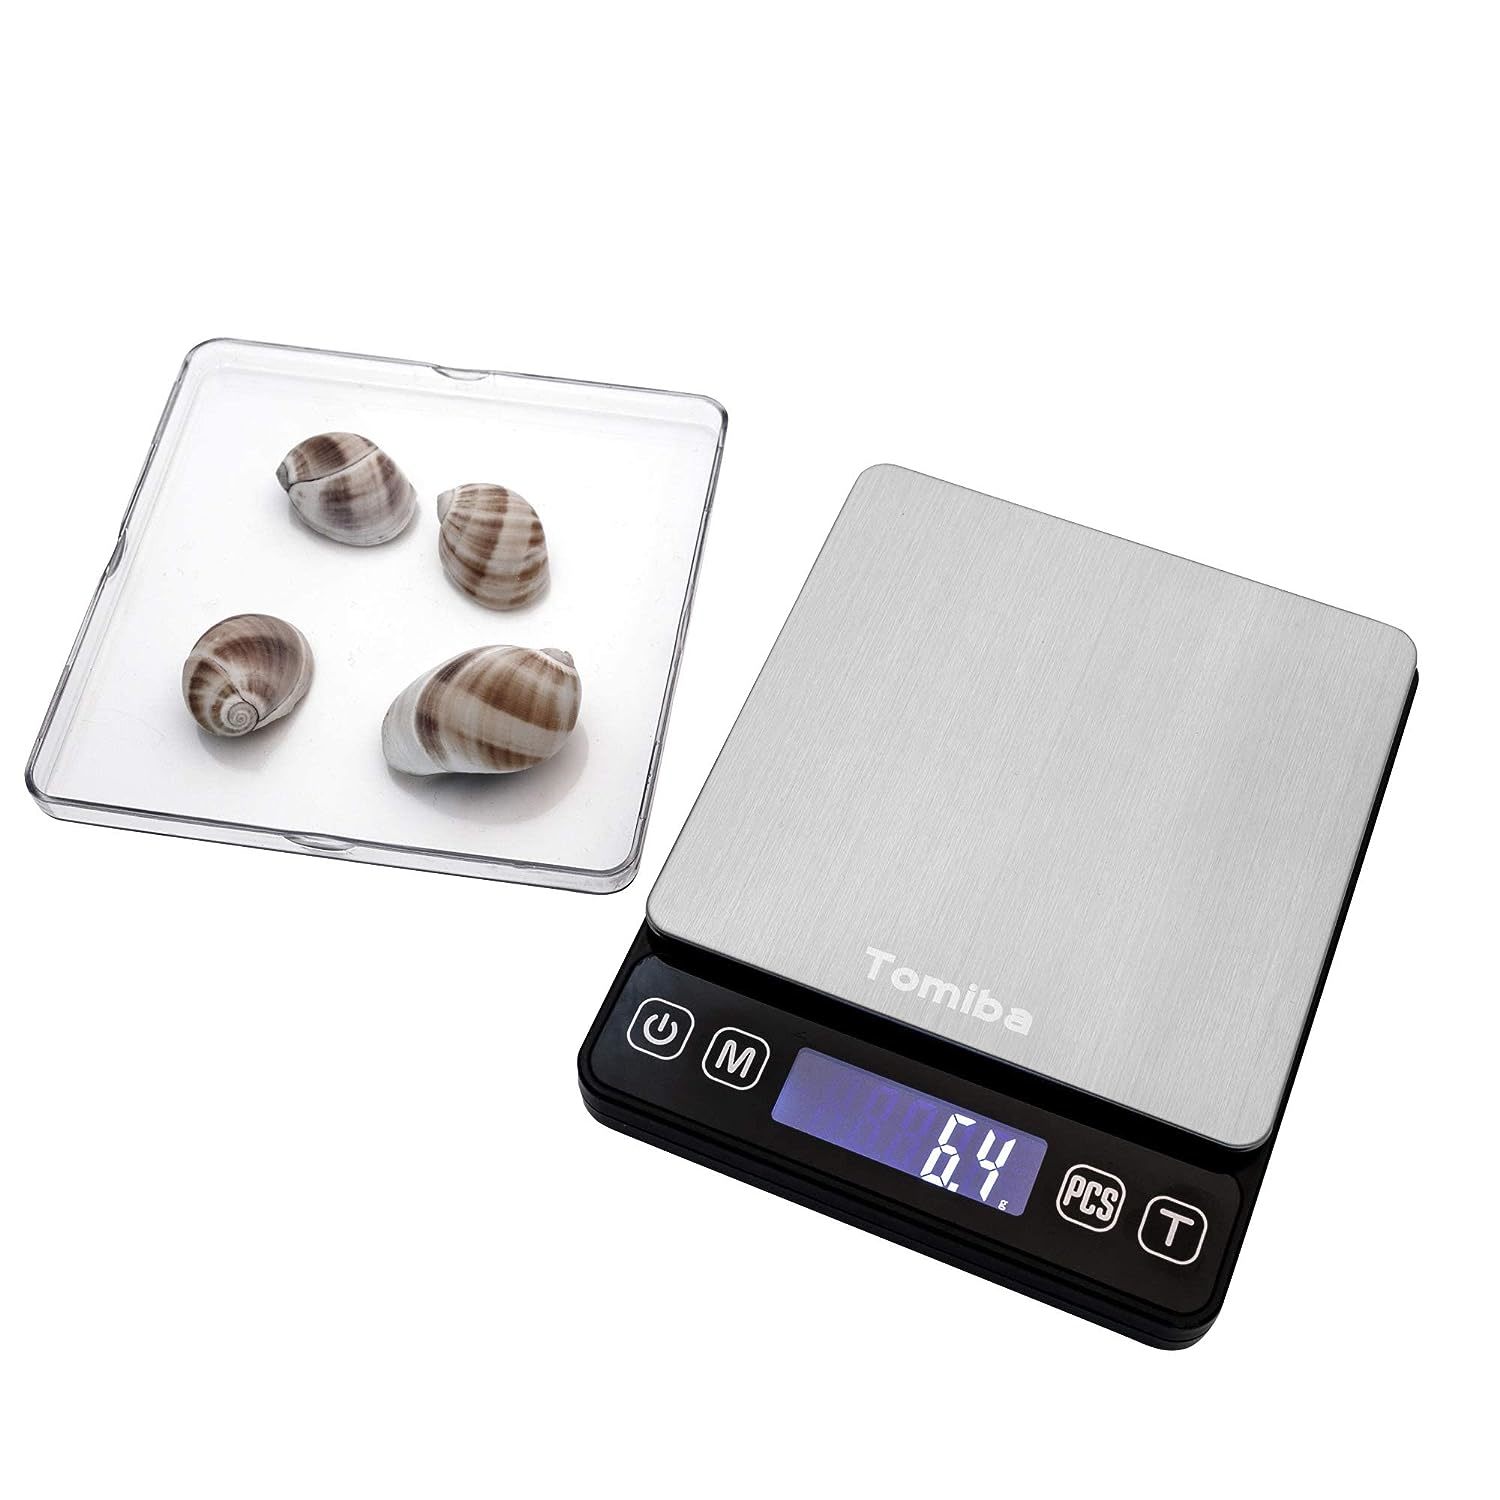 3000g/0.1g Small Digital Kitchen Food Diet Electronic Weight Scale +  Manual!